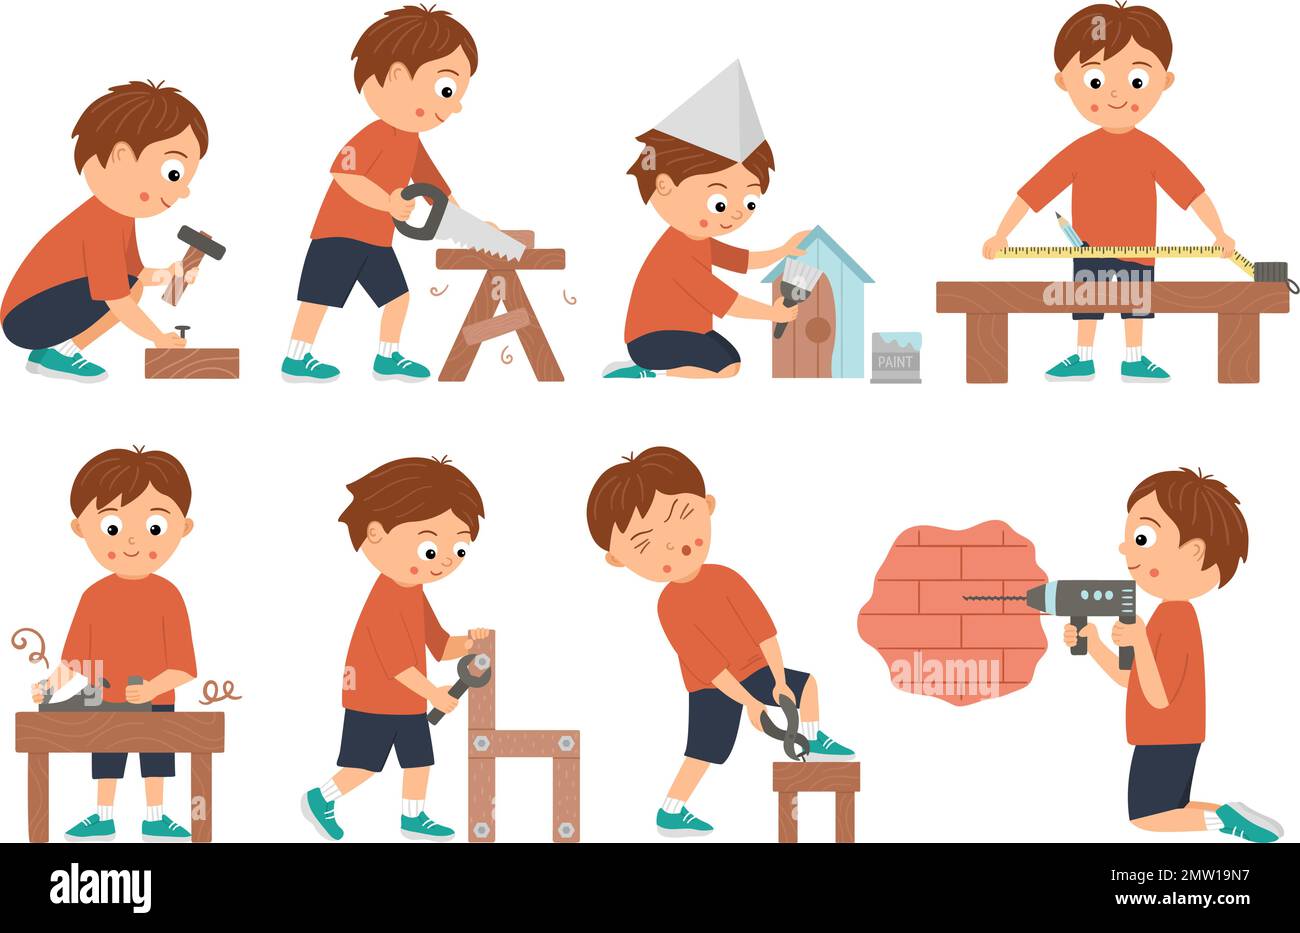 Vector set of boys doing carpenter, building or wood work. Flat funny kid character sawing, nailing up, measuring, drilling a wall, screwing, working Stock Vector